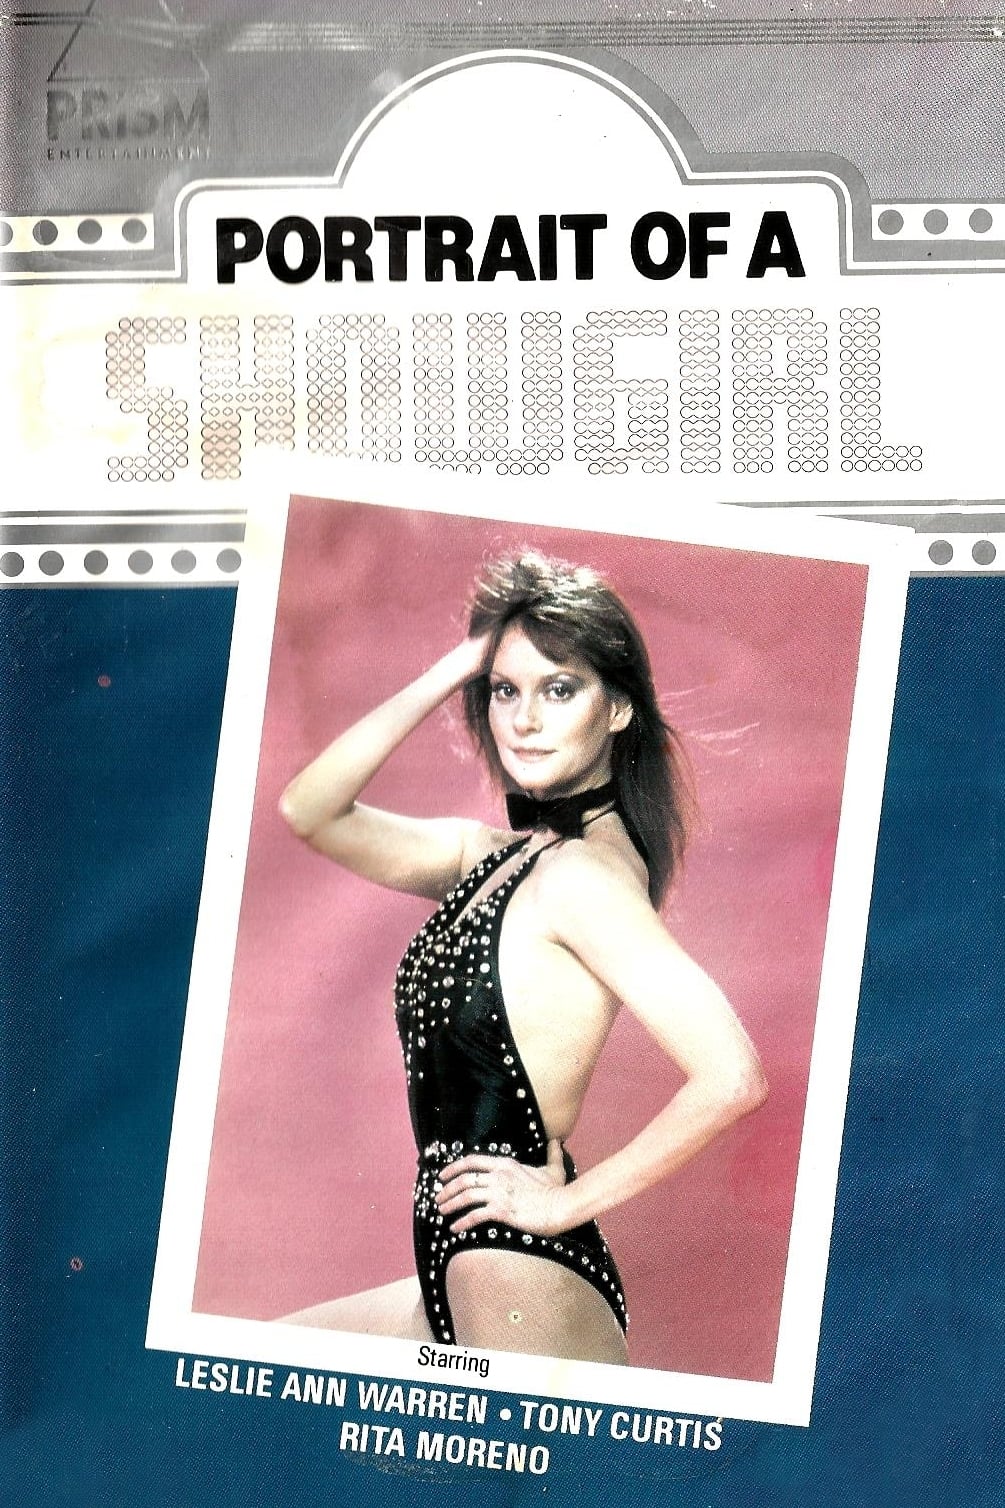 Portrait of a Showgirl Poster